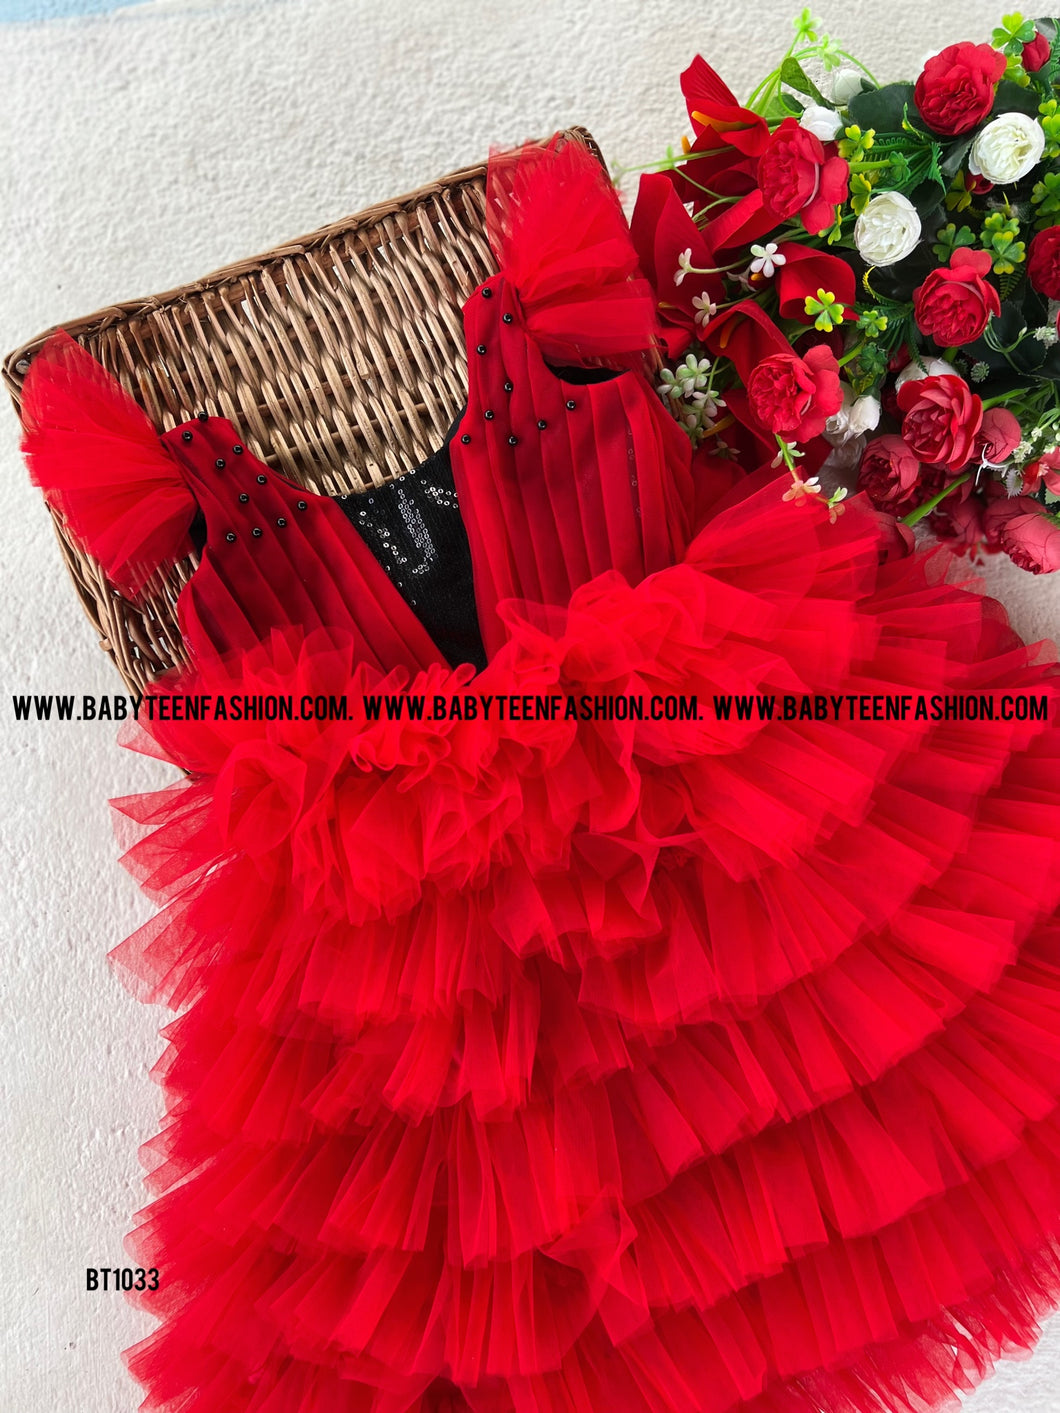 BT1033 Ruby Ruffle Delight Dress – Let Her Shine at Every Party